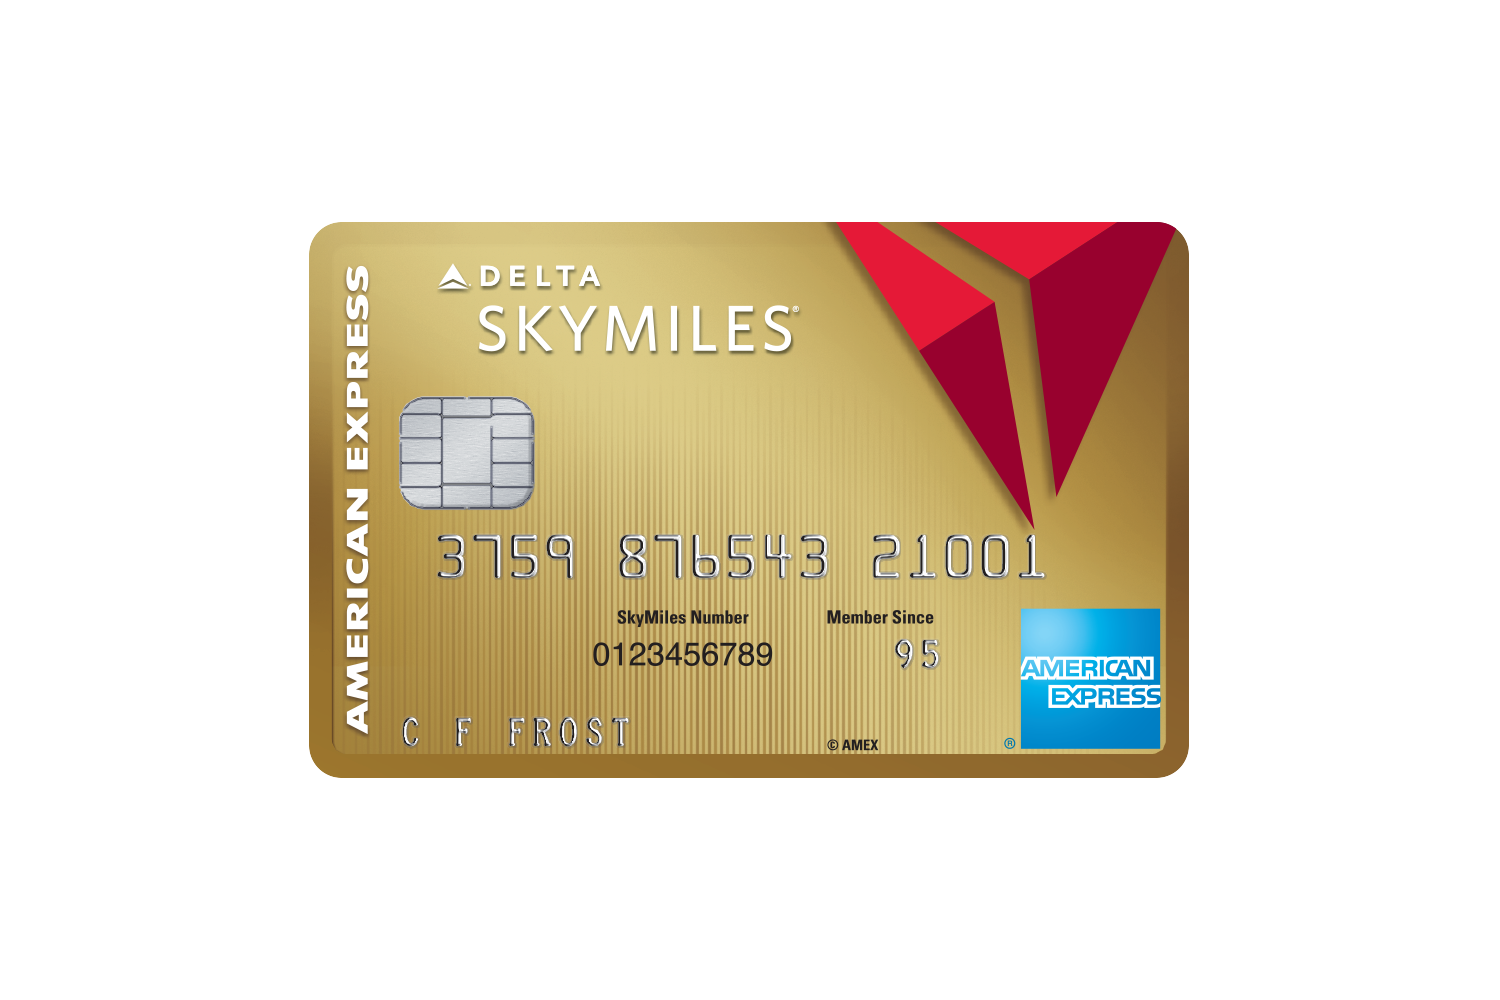 travel credit card airline miles